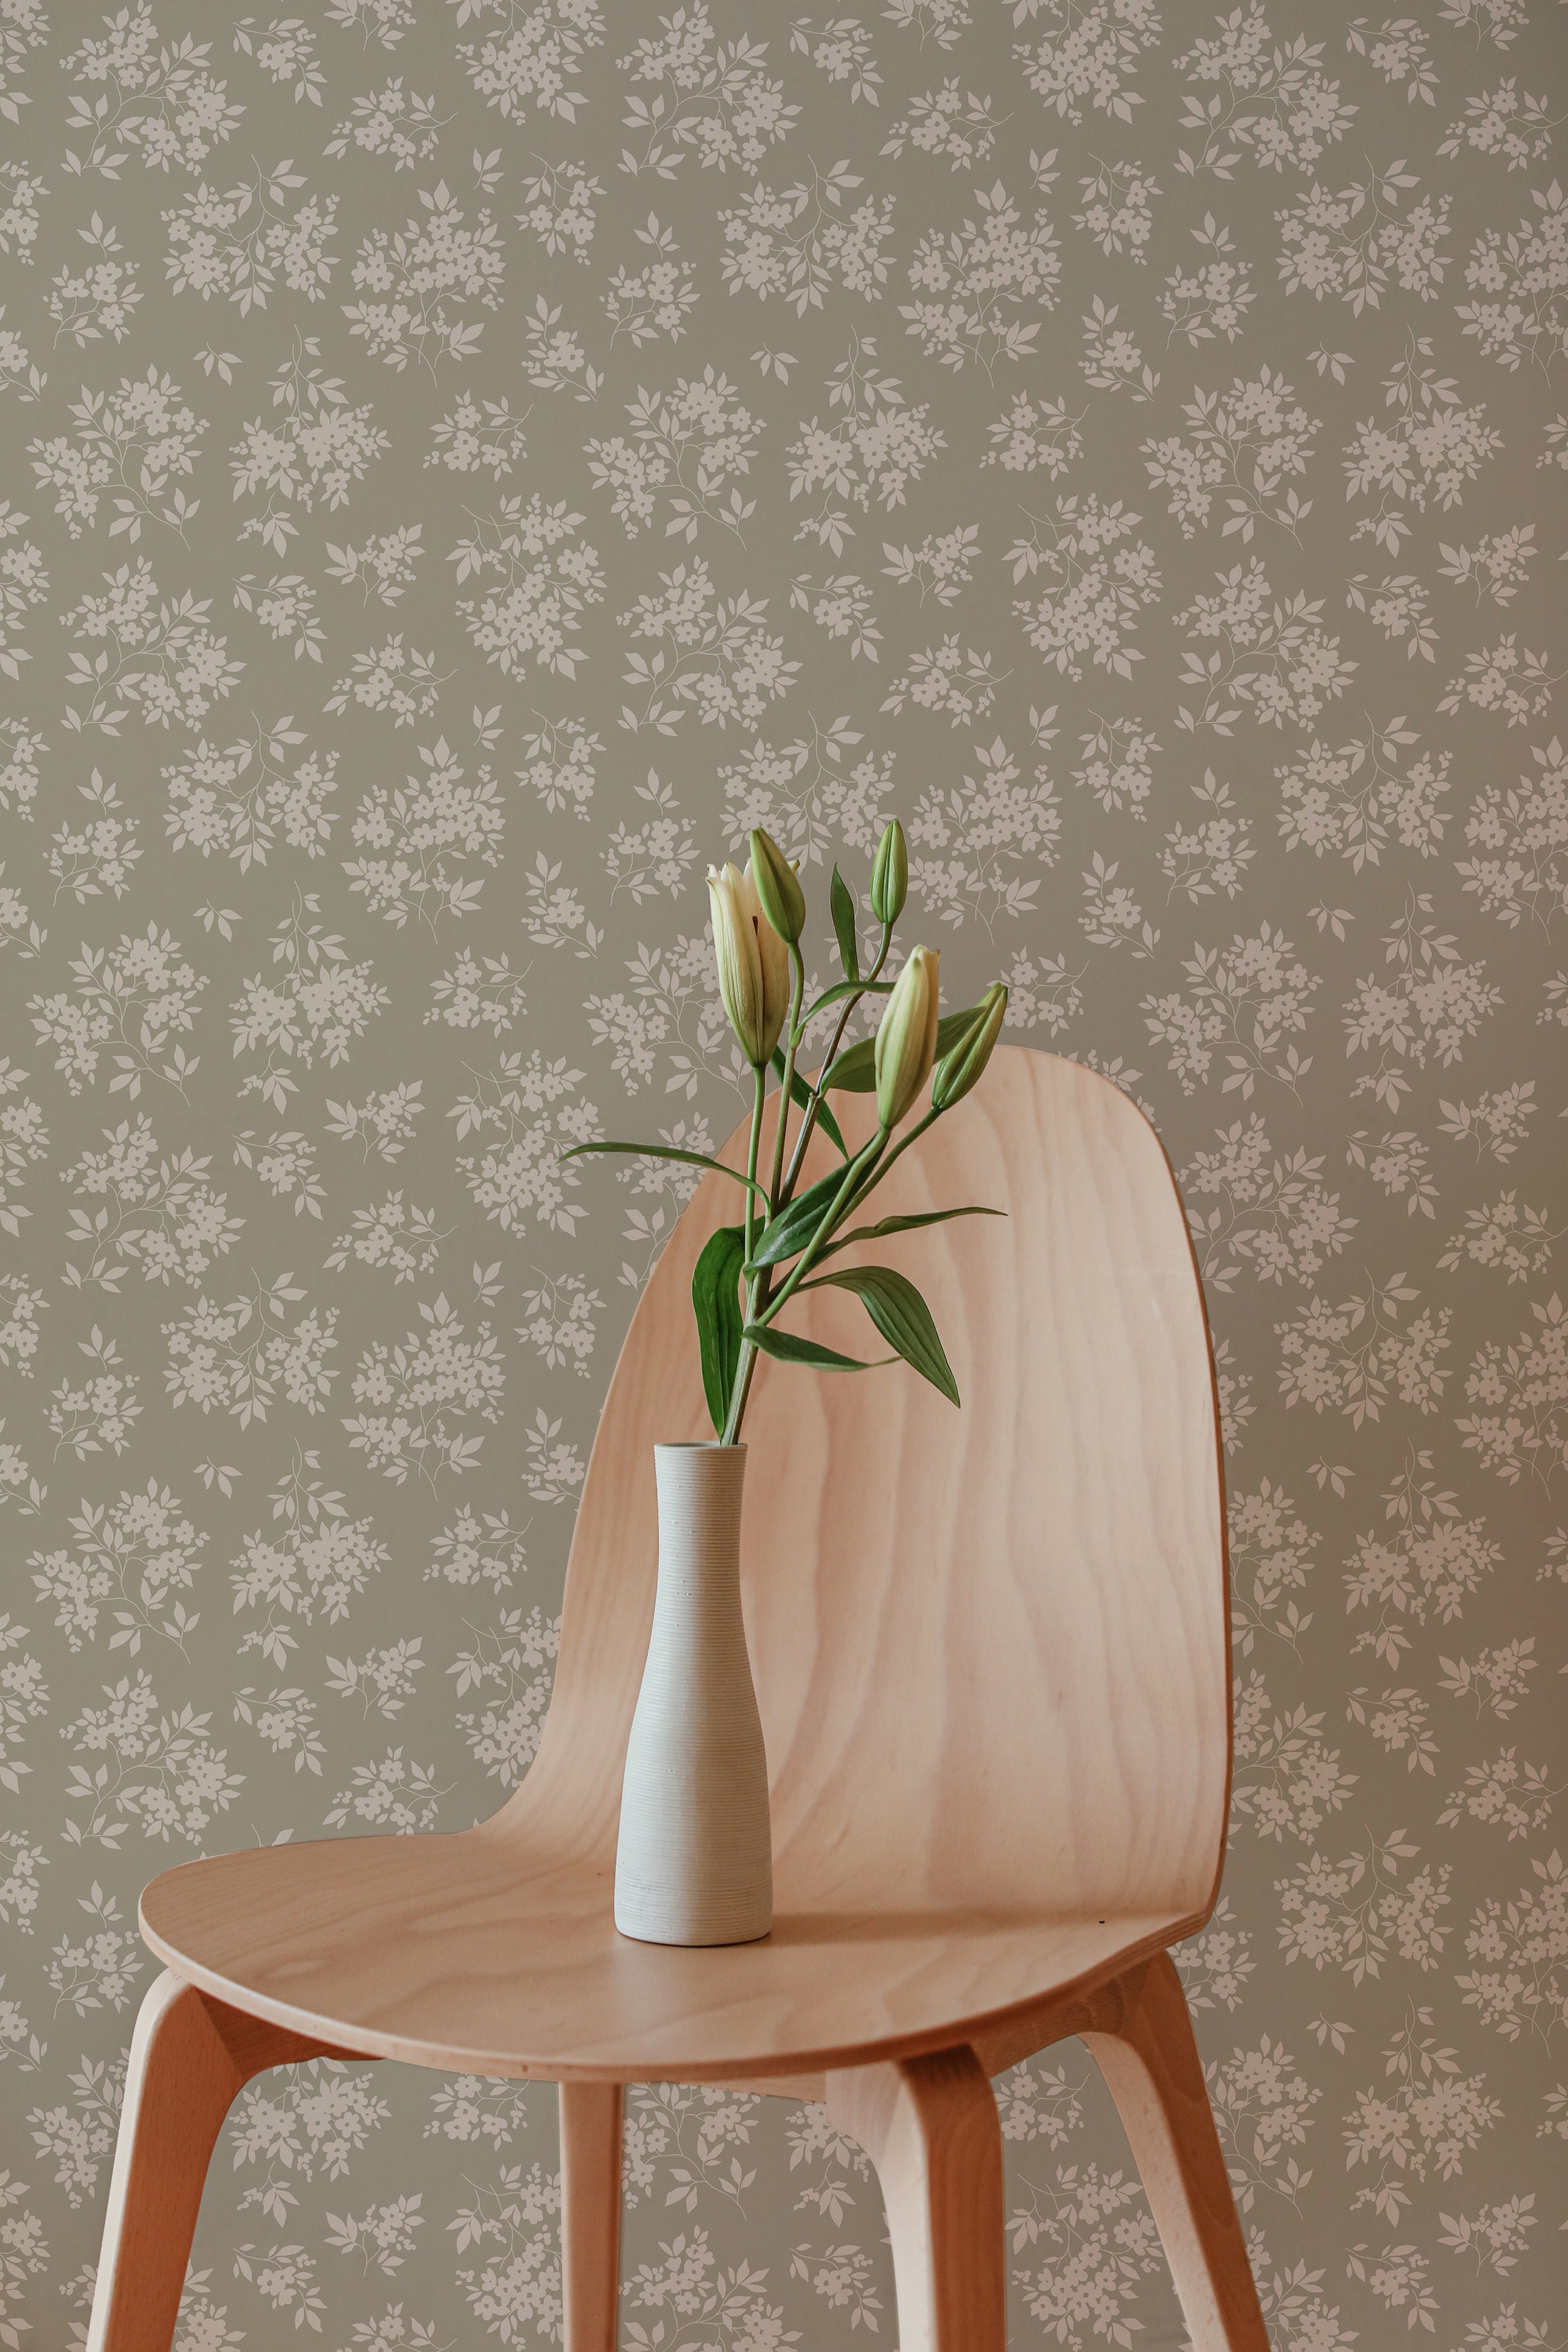 A simple, elegant wooden chair stands before a wall adorned with Vintage Garden Floral Wallpaper in Olive. On the chair, a white vase with budding green flowers adds a touch of life and color to the serene setting, suggesting a harmonious blend of modern design and nature-inspired elements.